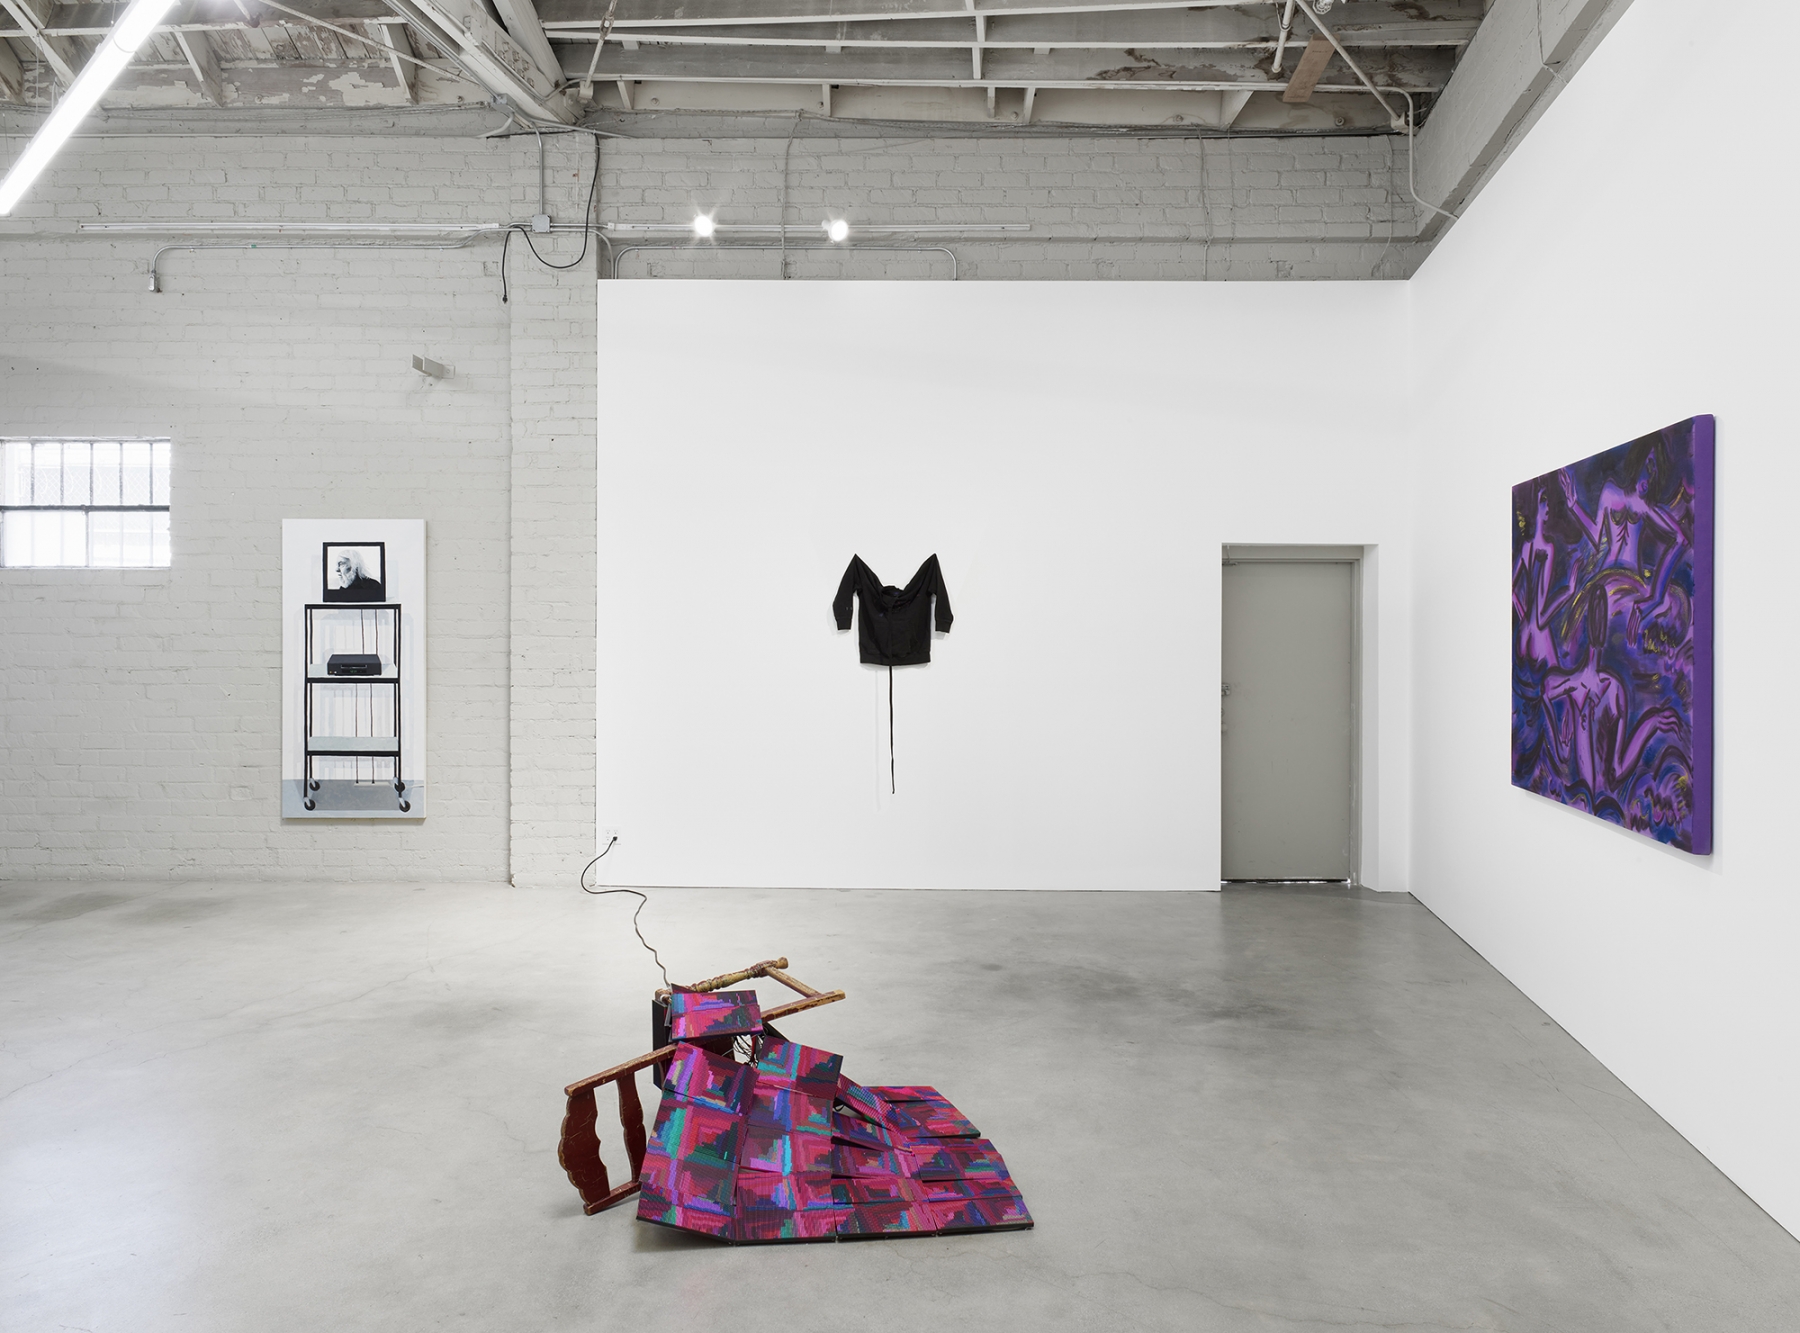 Installation view of Majeure Force, Part Two, featuring works by Cynthia Daignault, Luke Murphy, Daniel G. Lomack, and Mira Dancy.